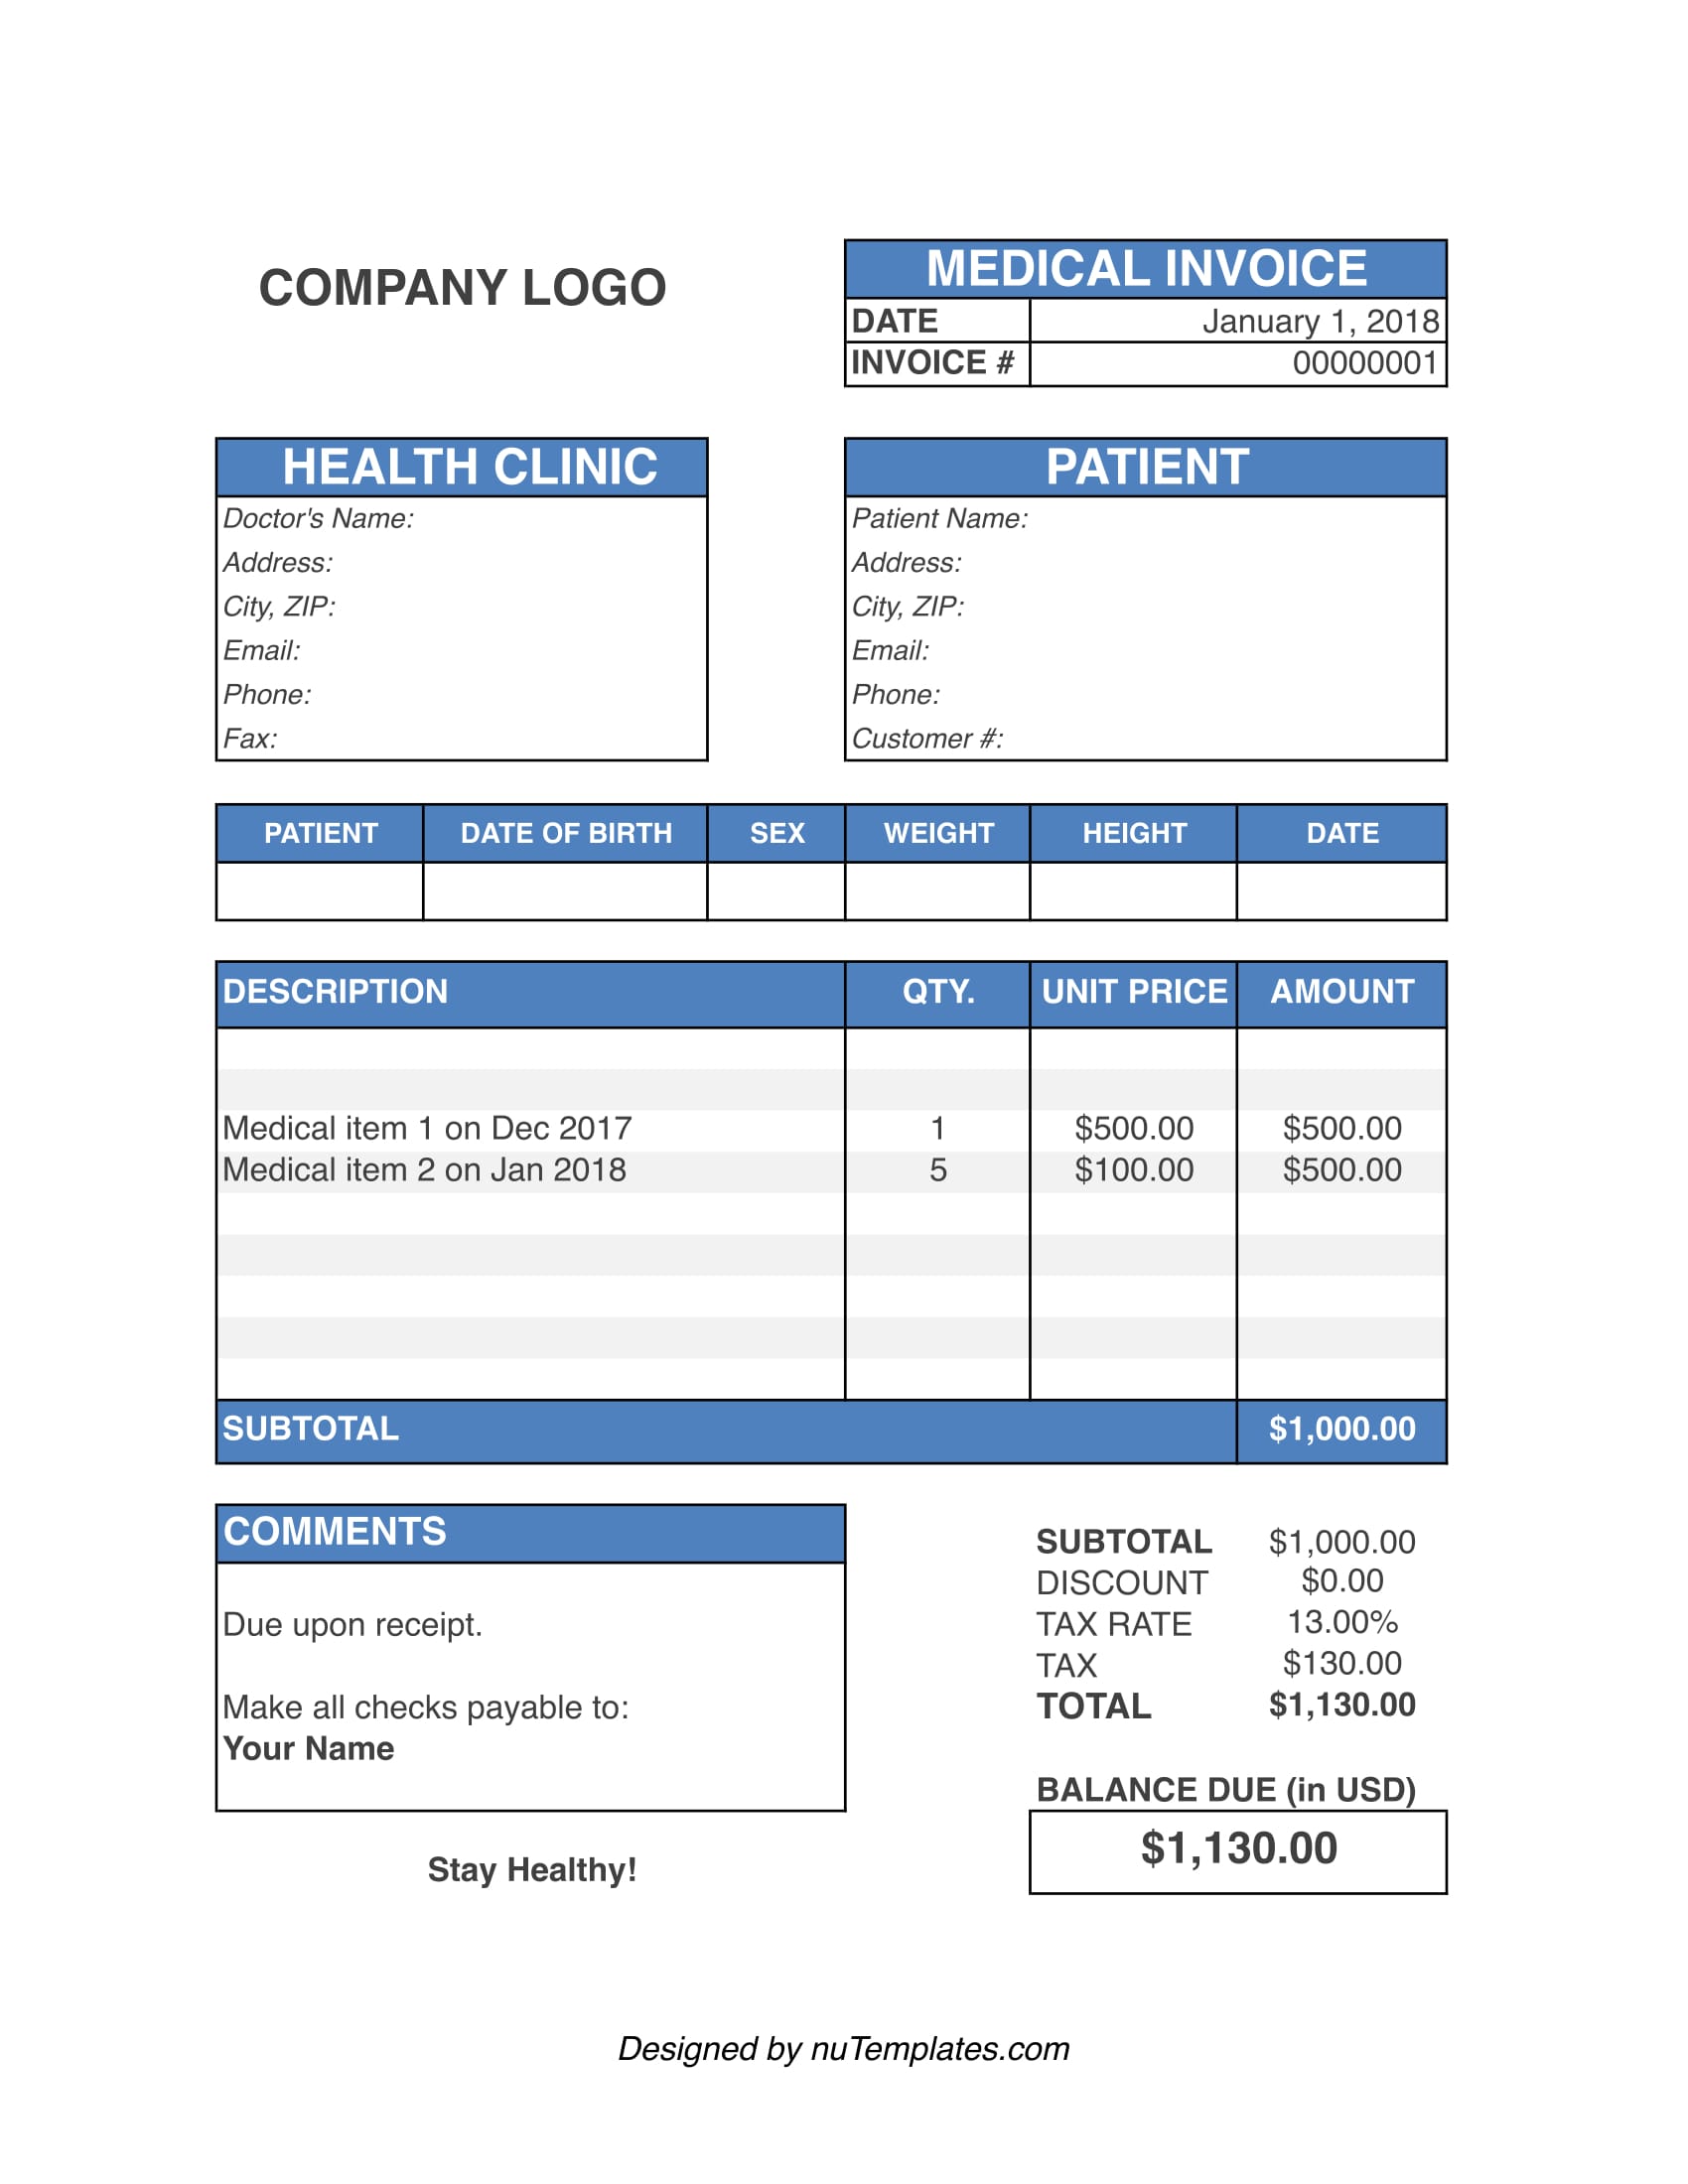 medical-invoice-template-medical-invoices-nutemplates